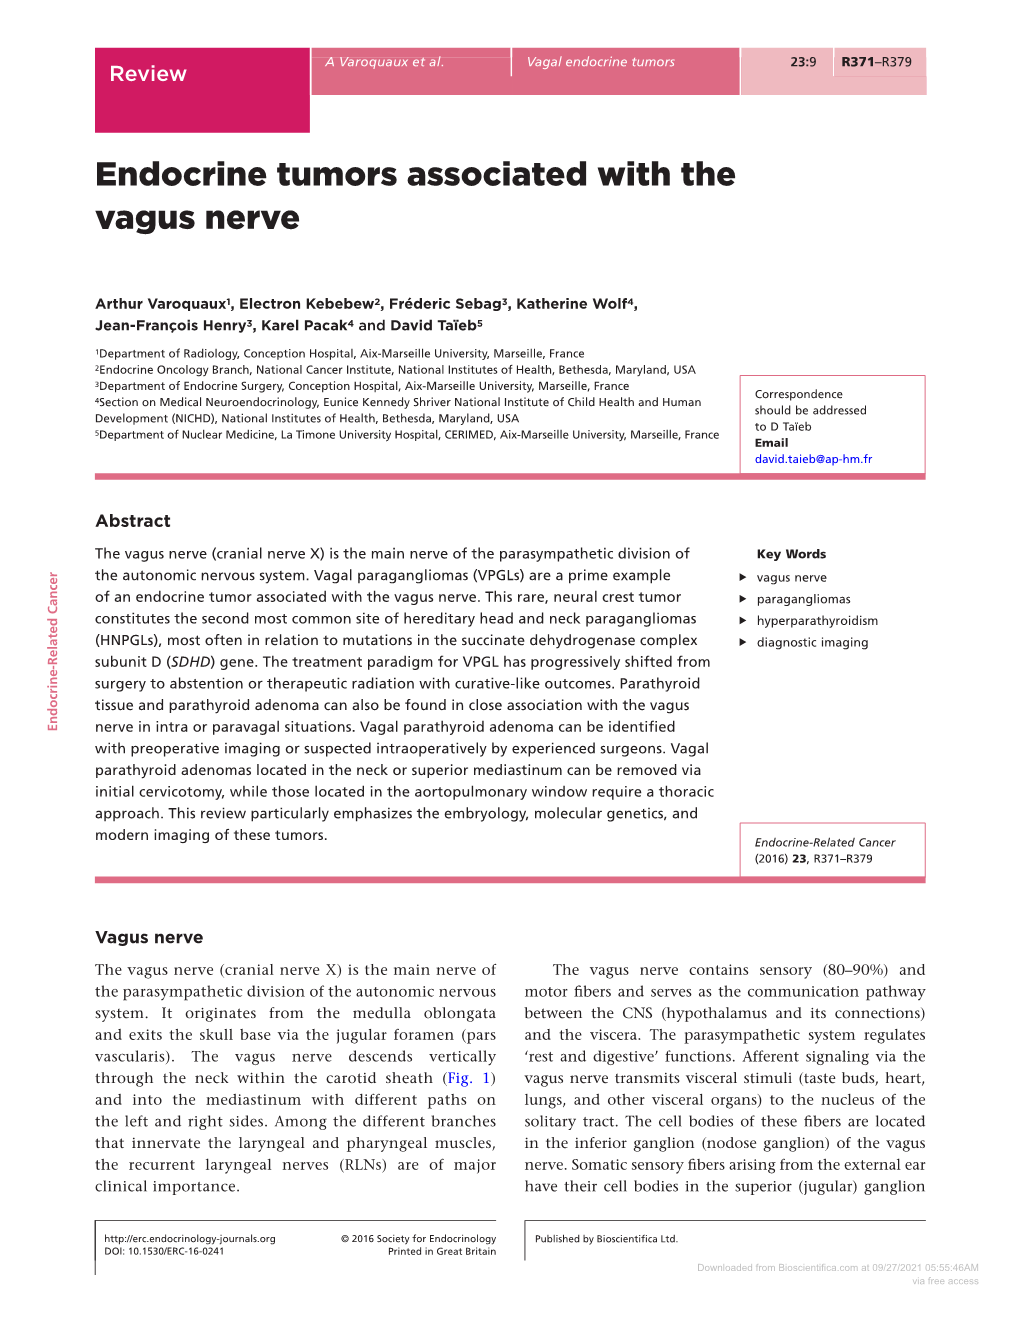 Endocrine Tumors Associated with the Vagus Nerve